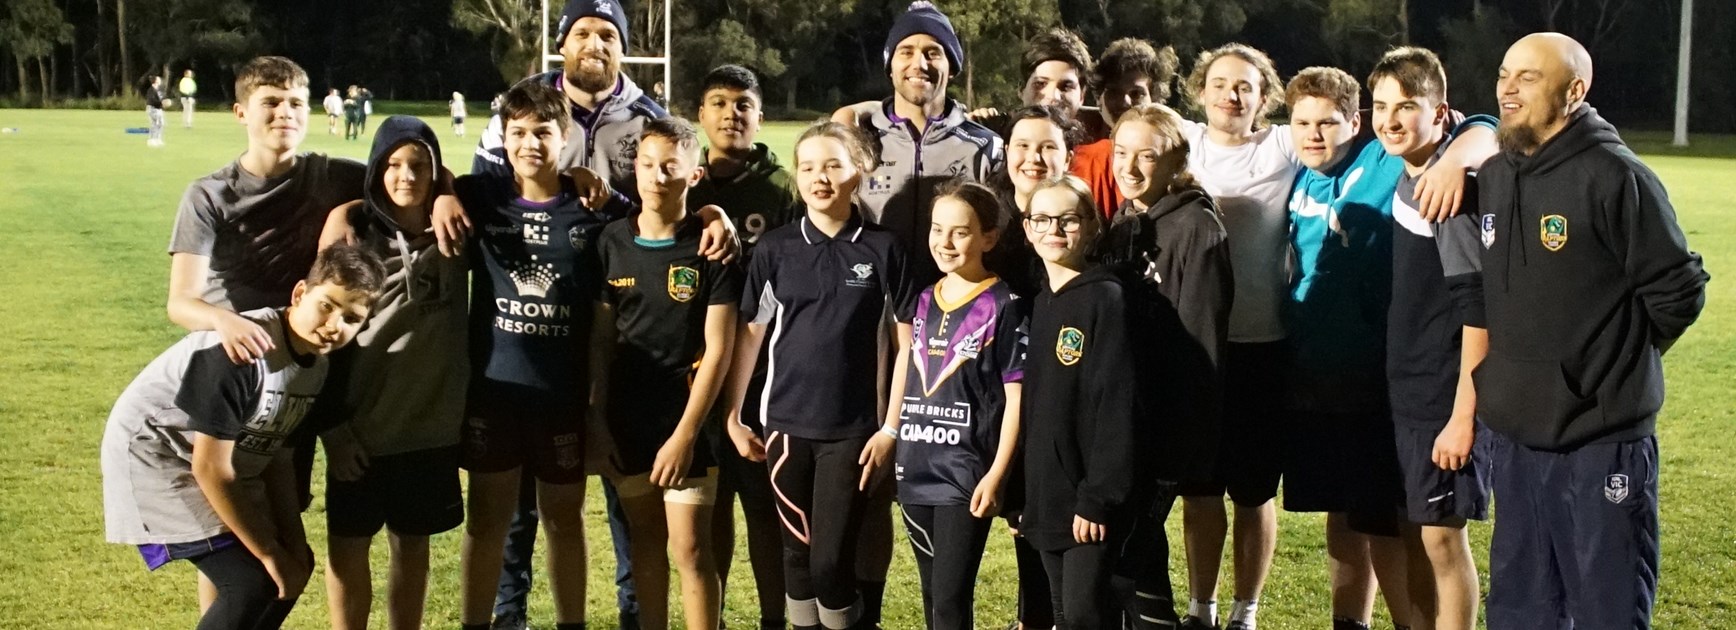 Storm players inspire at grassroots rugby league clubs